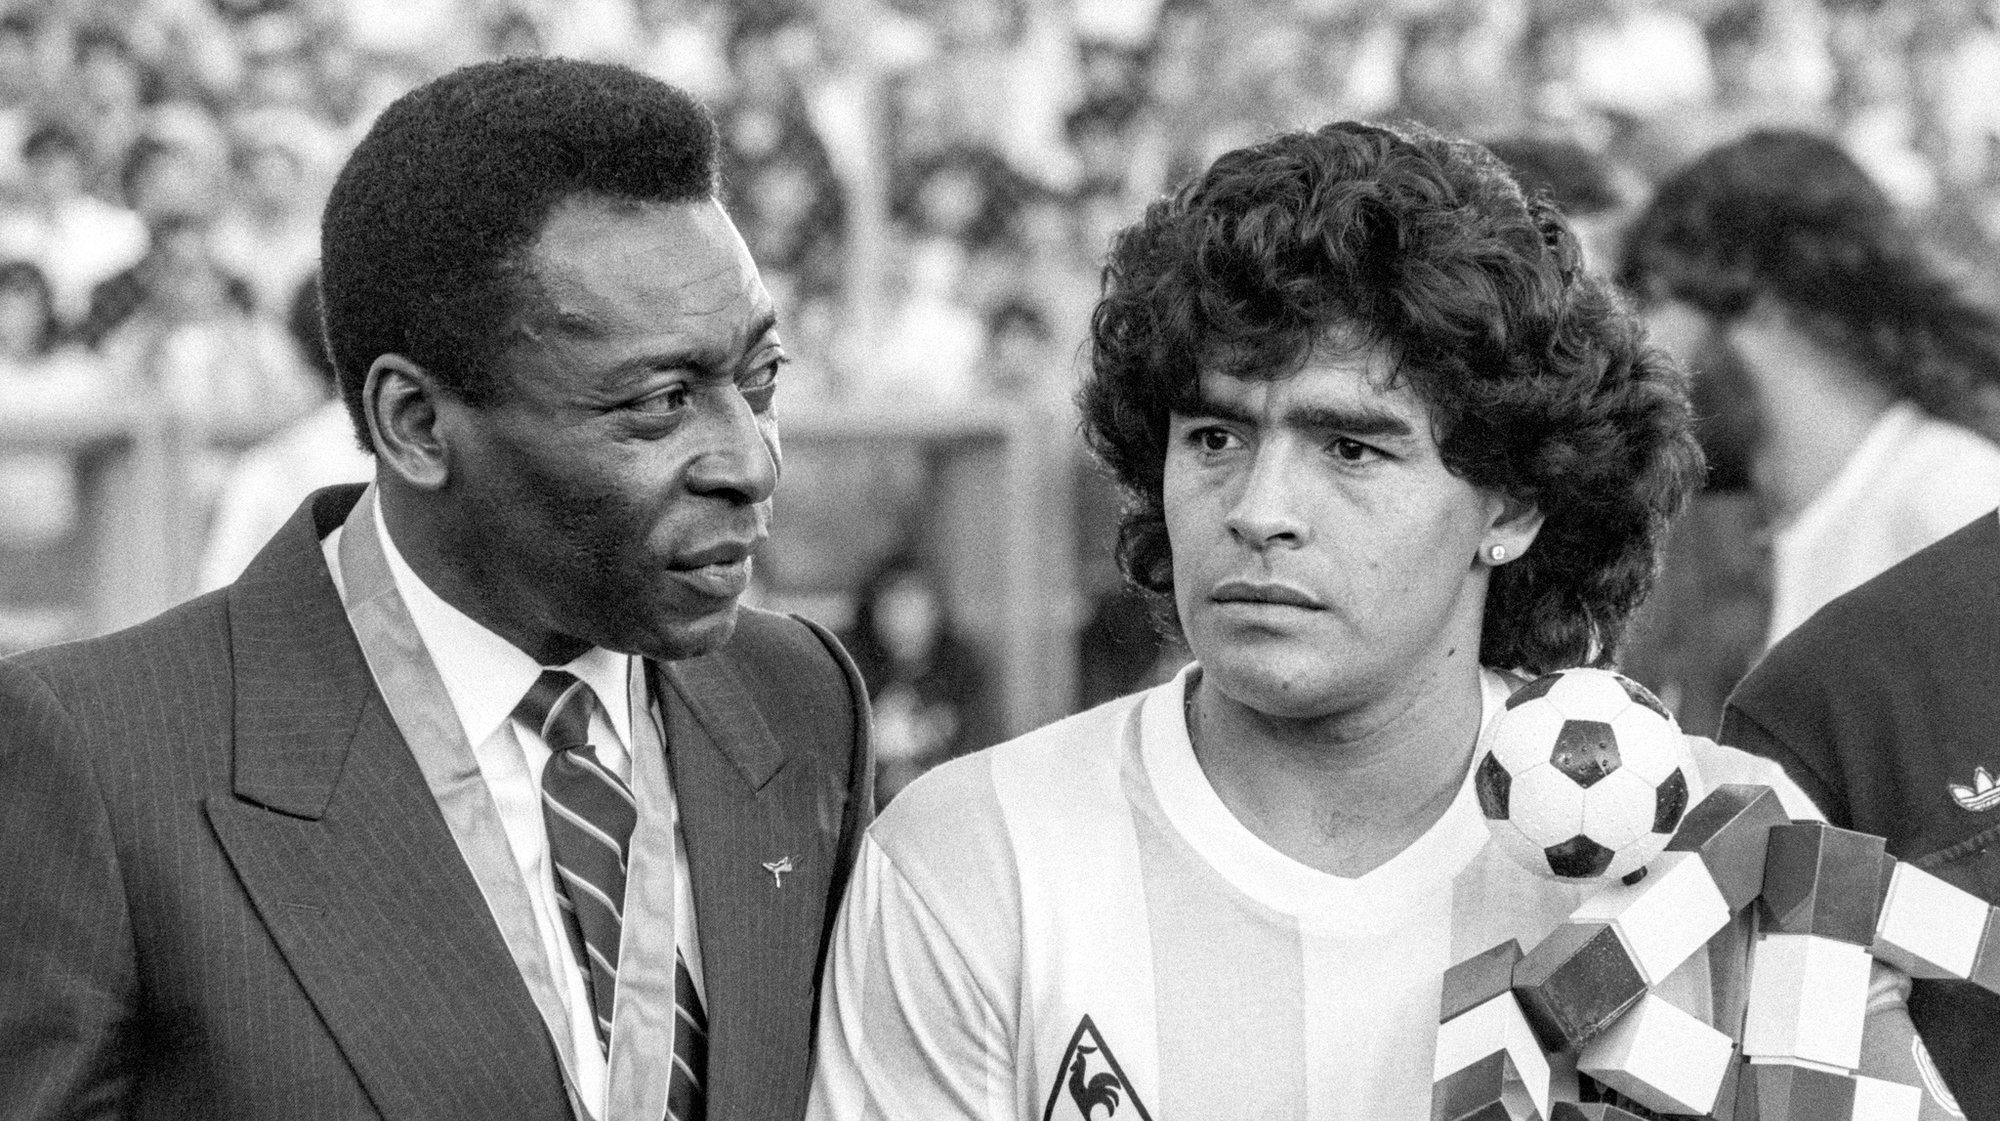 epa08841682 (FILE) - Brazilian soccer legend Pele (L) and Argentinian soccer legend Diego Maradona (R) during the match between Italy and Argentina in Zurich, Switzerland, 10 June 1987 (re-issued on 25 November 2020). Diego Maradona has died after a heart attack, media reports claimed on 25 November 2020. The Argentine soccer great was among the best players ever and who led his country to the 1986 World Cup title before later struggling with cocaine use and obesity. He was 60.  EPA/STR B/W ONLY